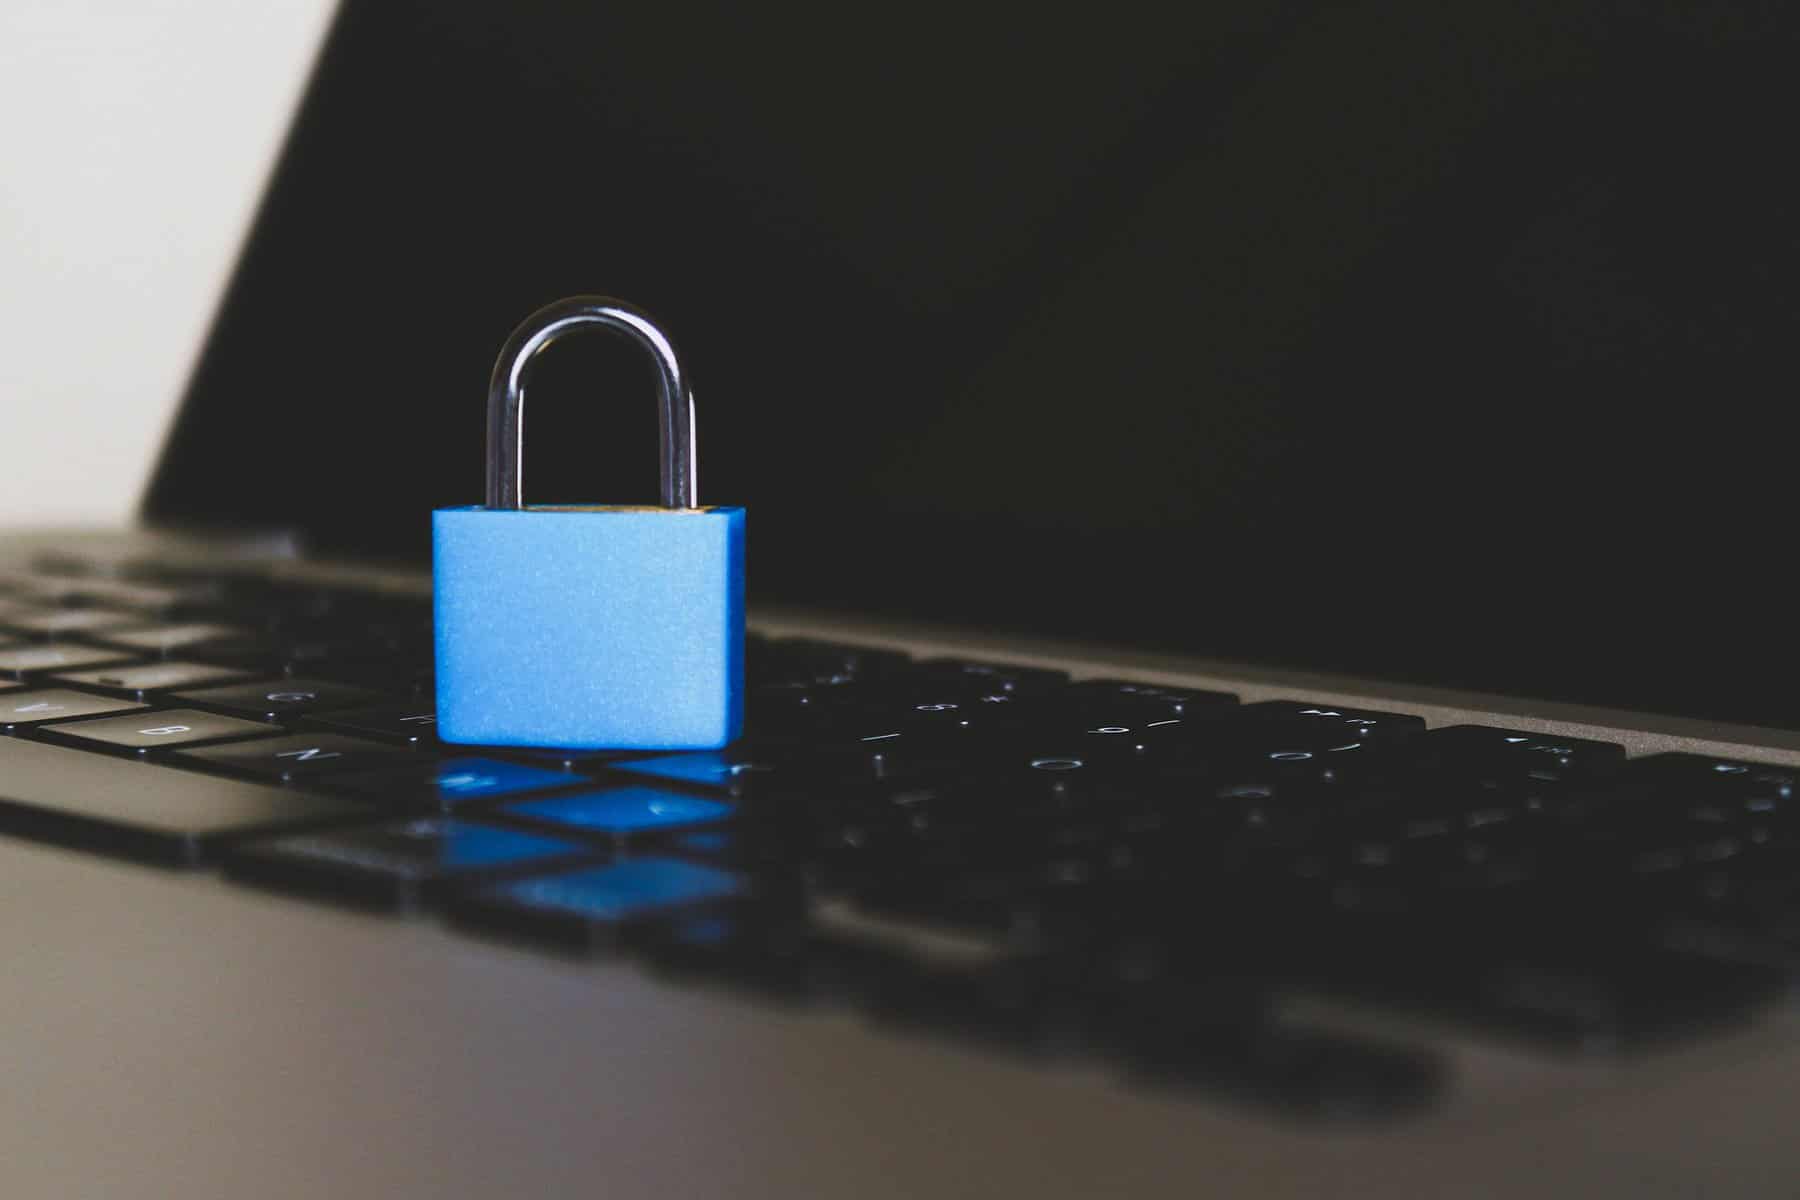 A blue padlock is shown sitting on the keyboard of a laptop.